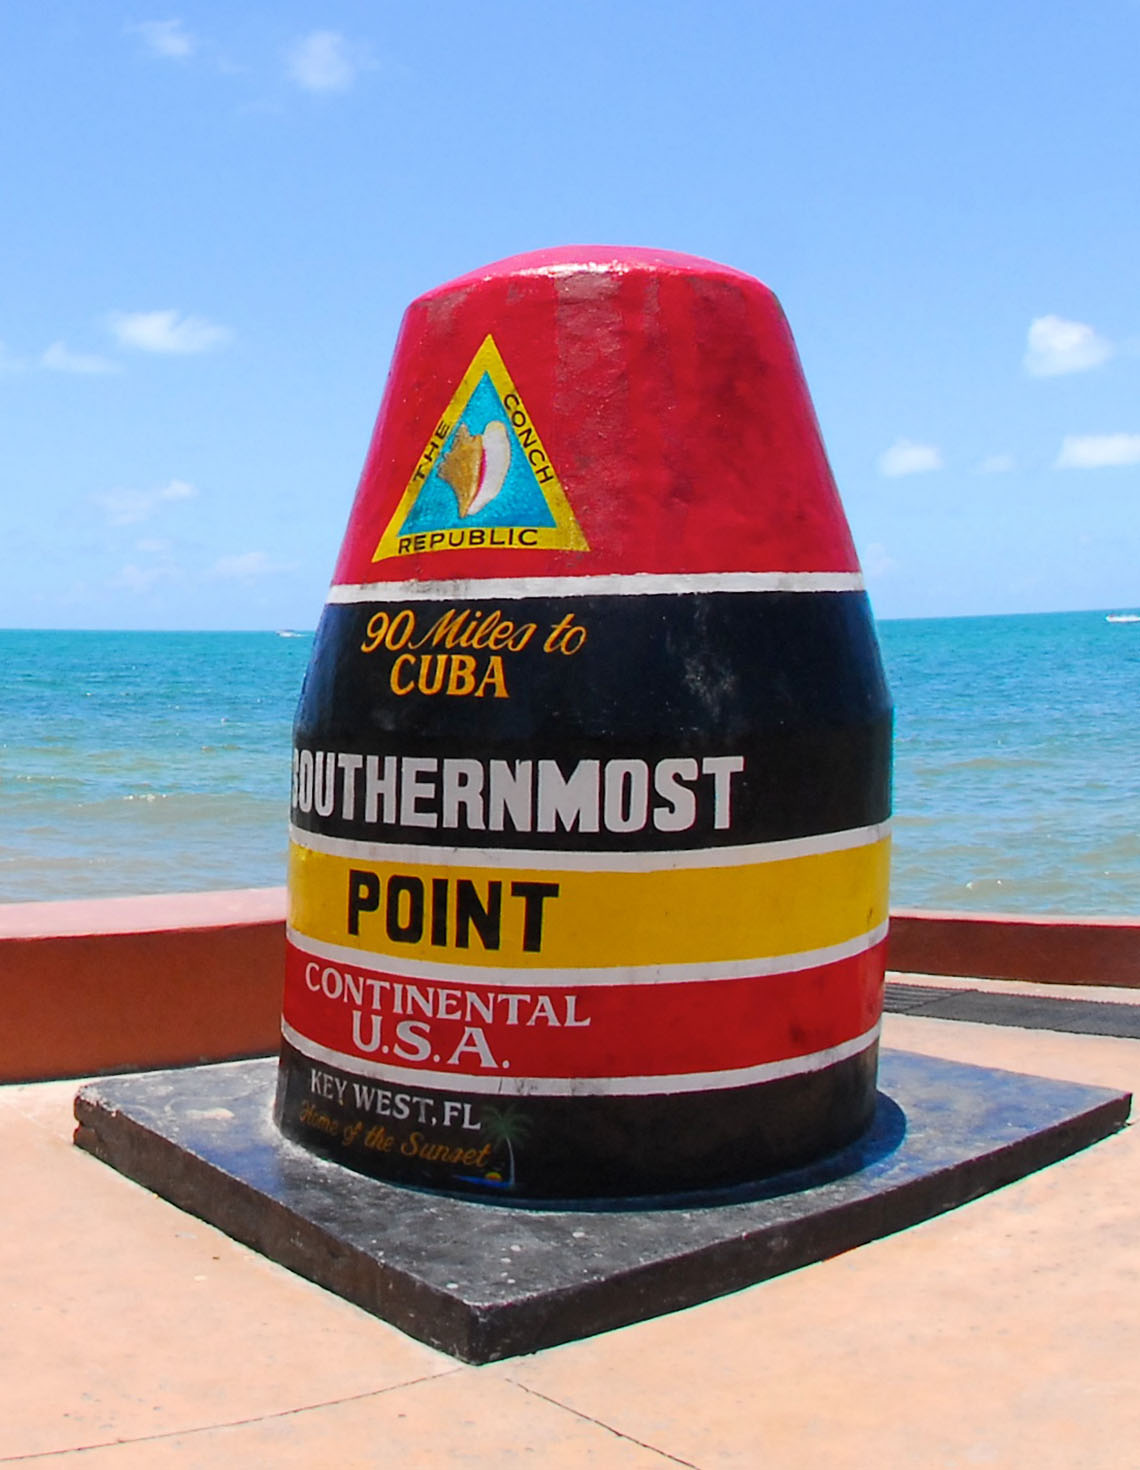 southernmost point buoy in key west